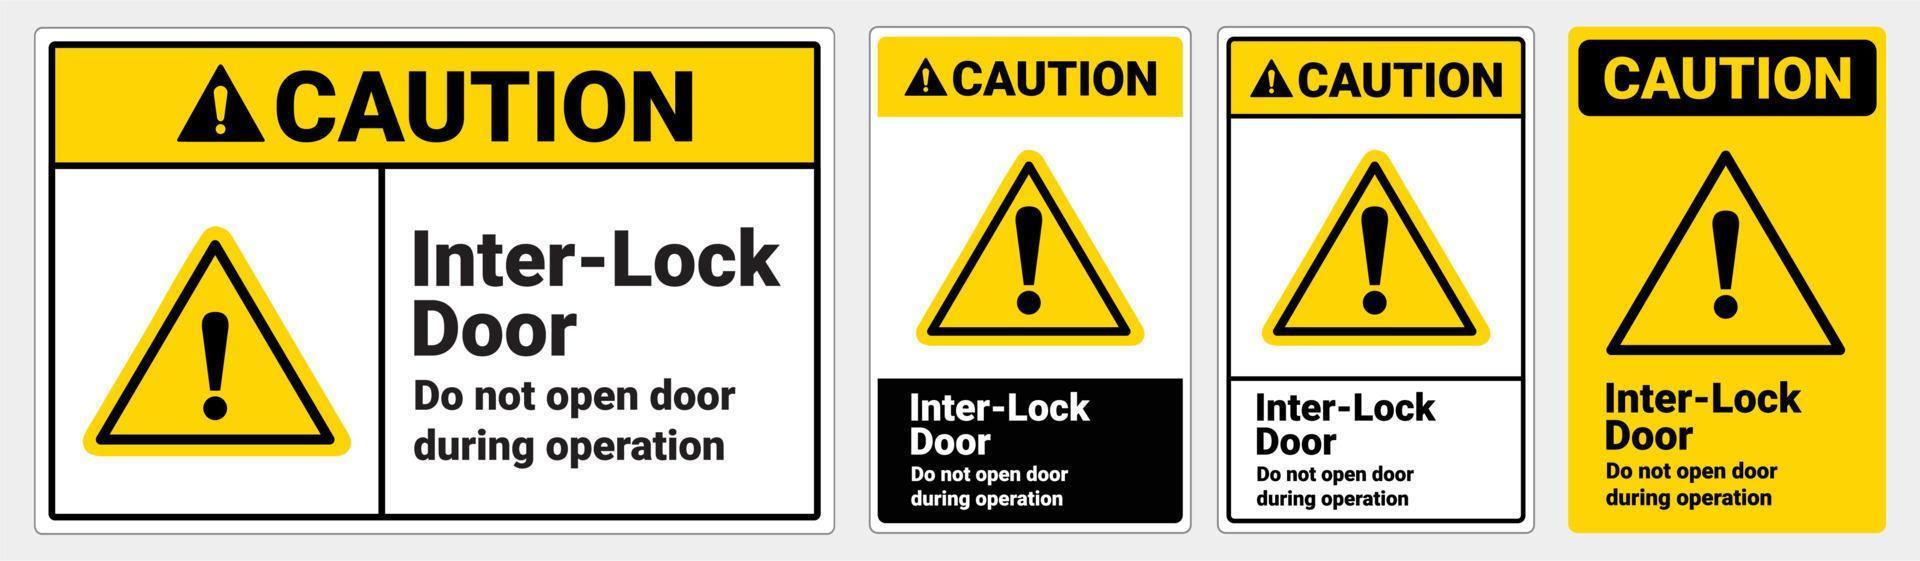 Safety signs caution Interlock doors do not open door during operation. ANSI and OSHA standard formats vector